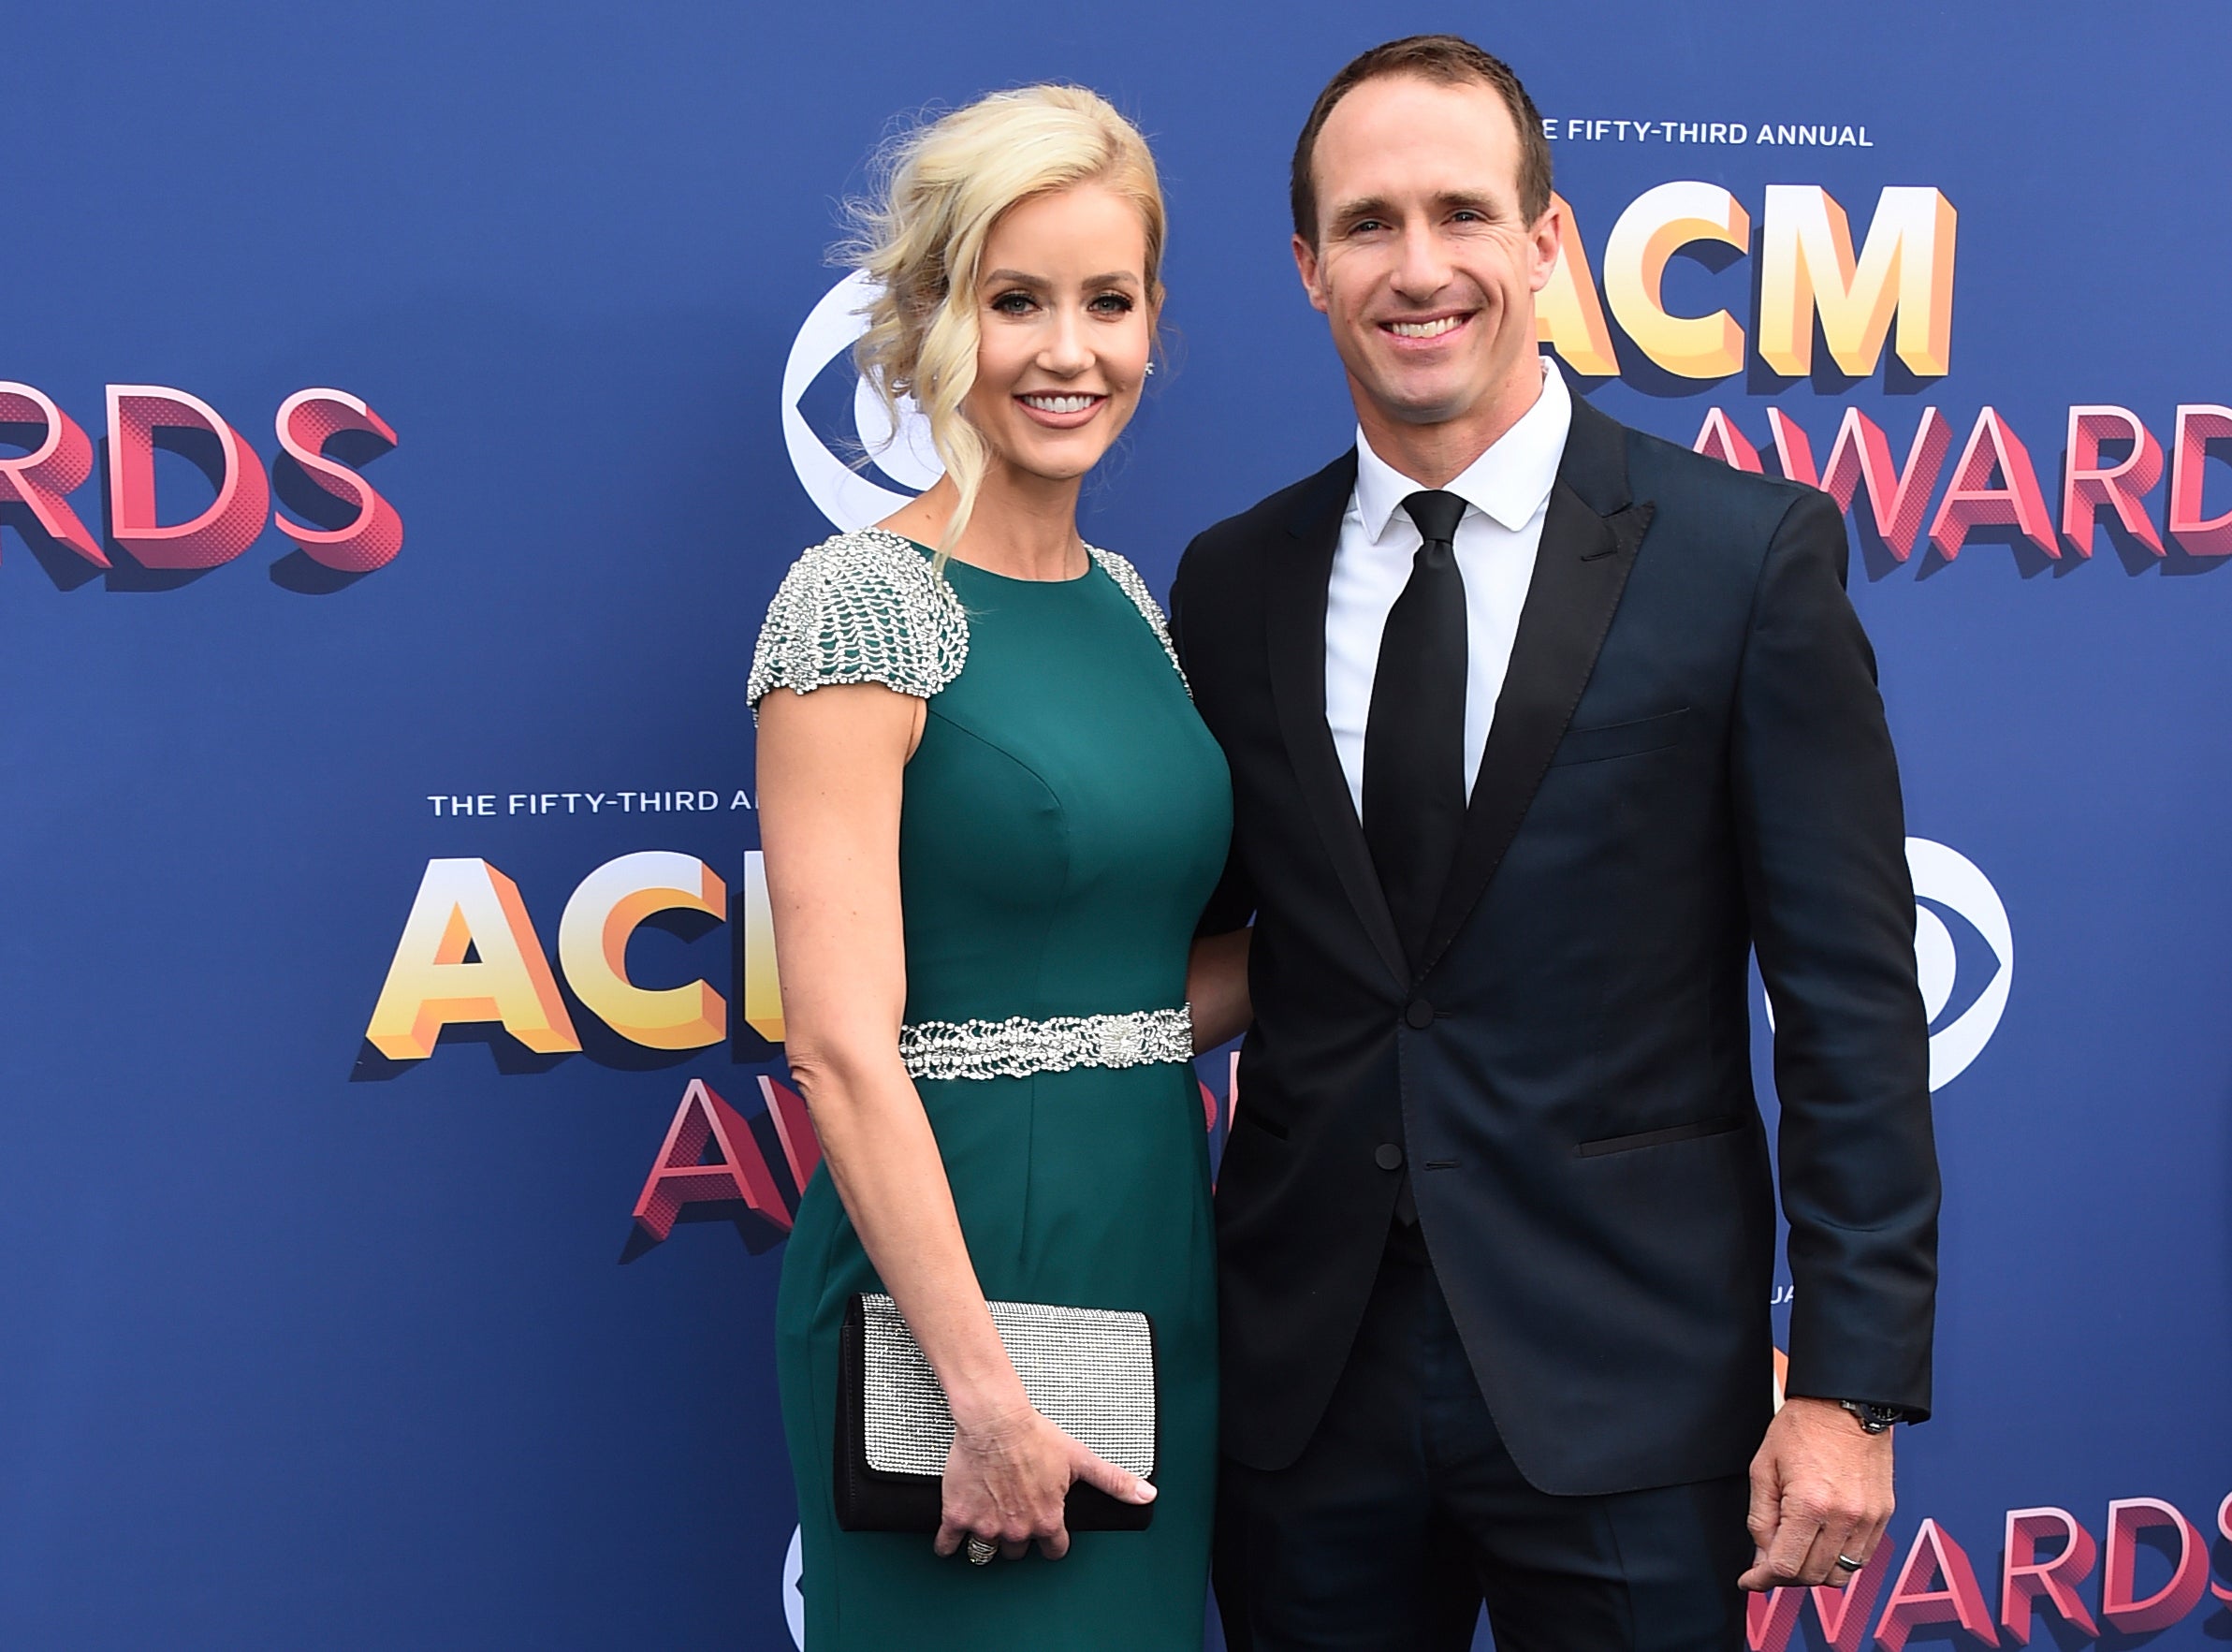 Drew Brees' wife apologizes for husband's comments on flag - WISH-TV ...